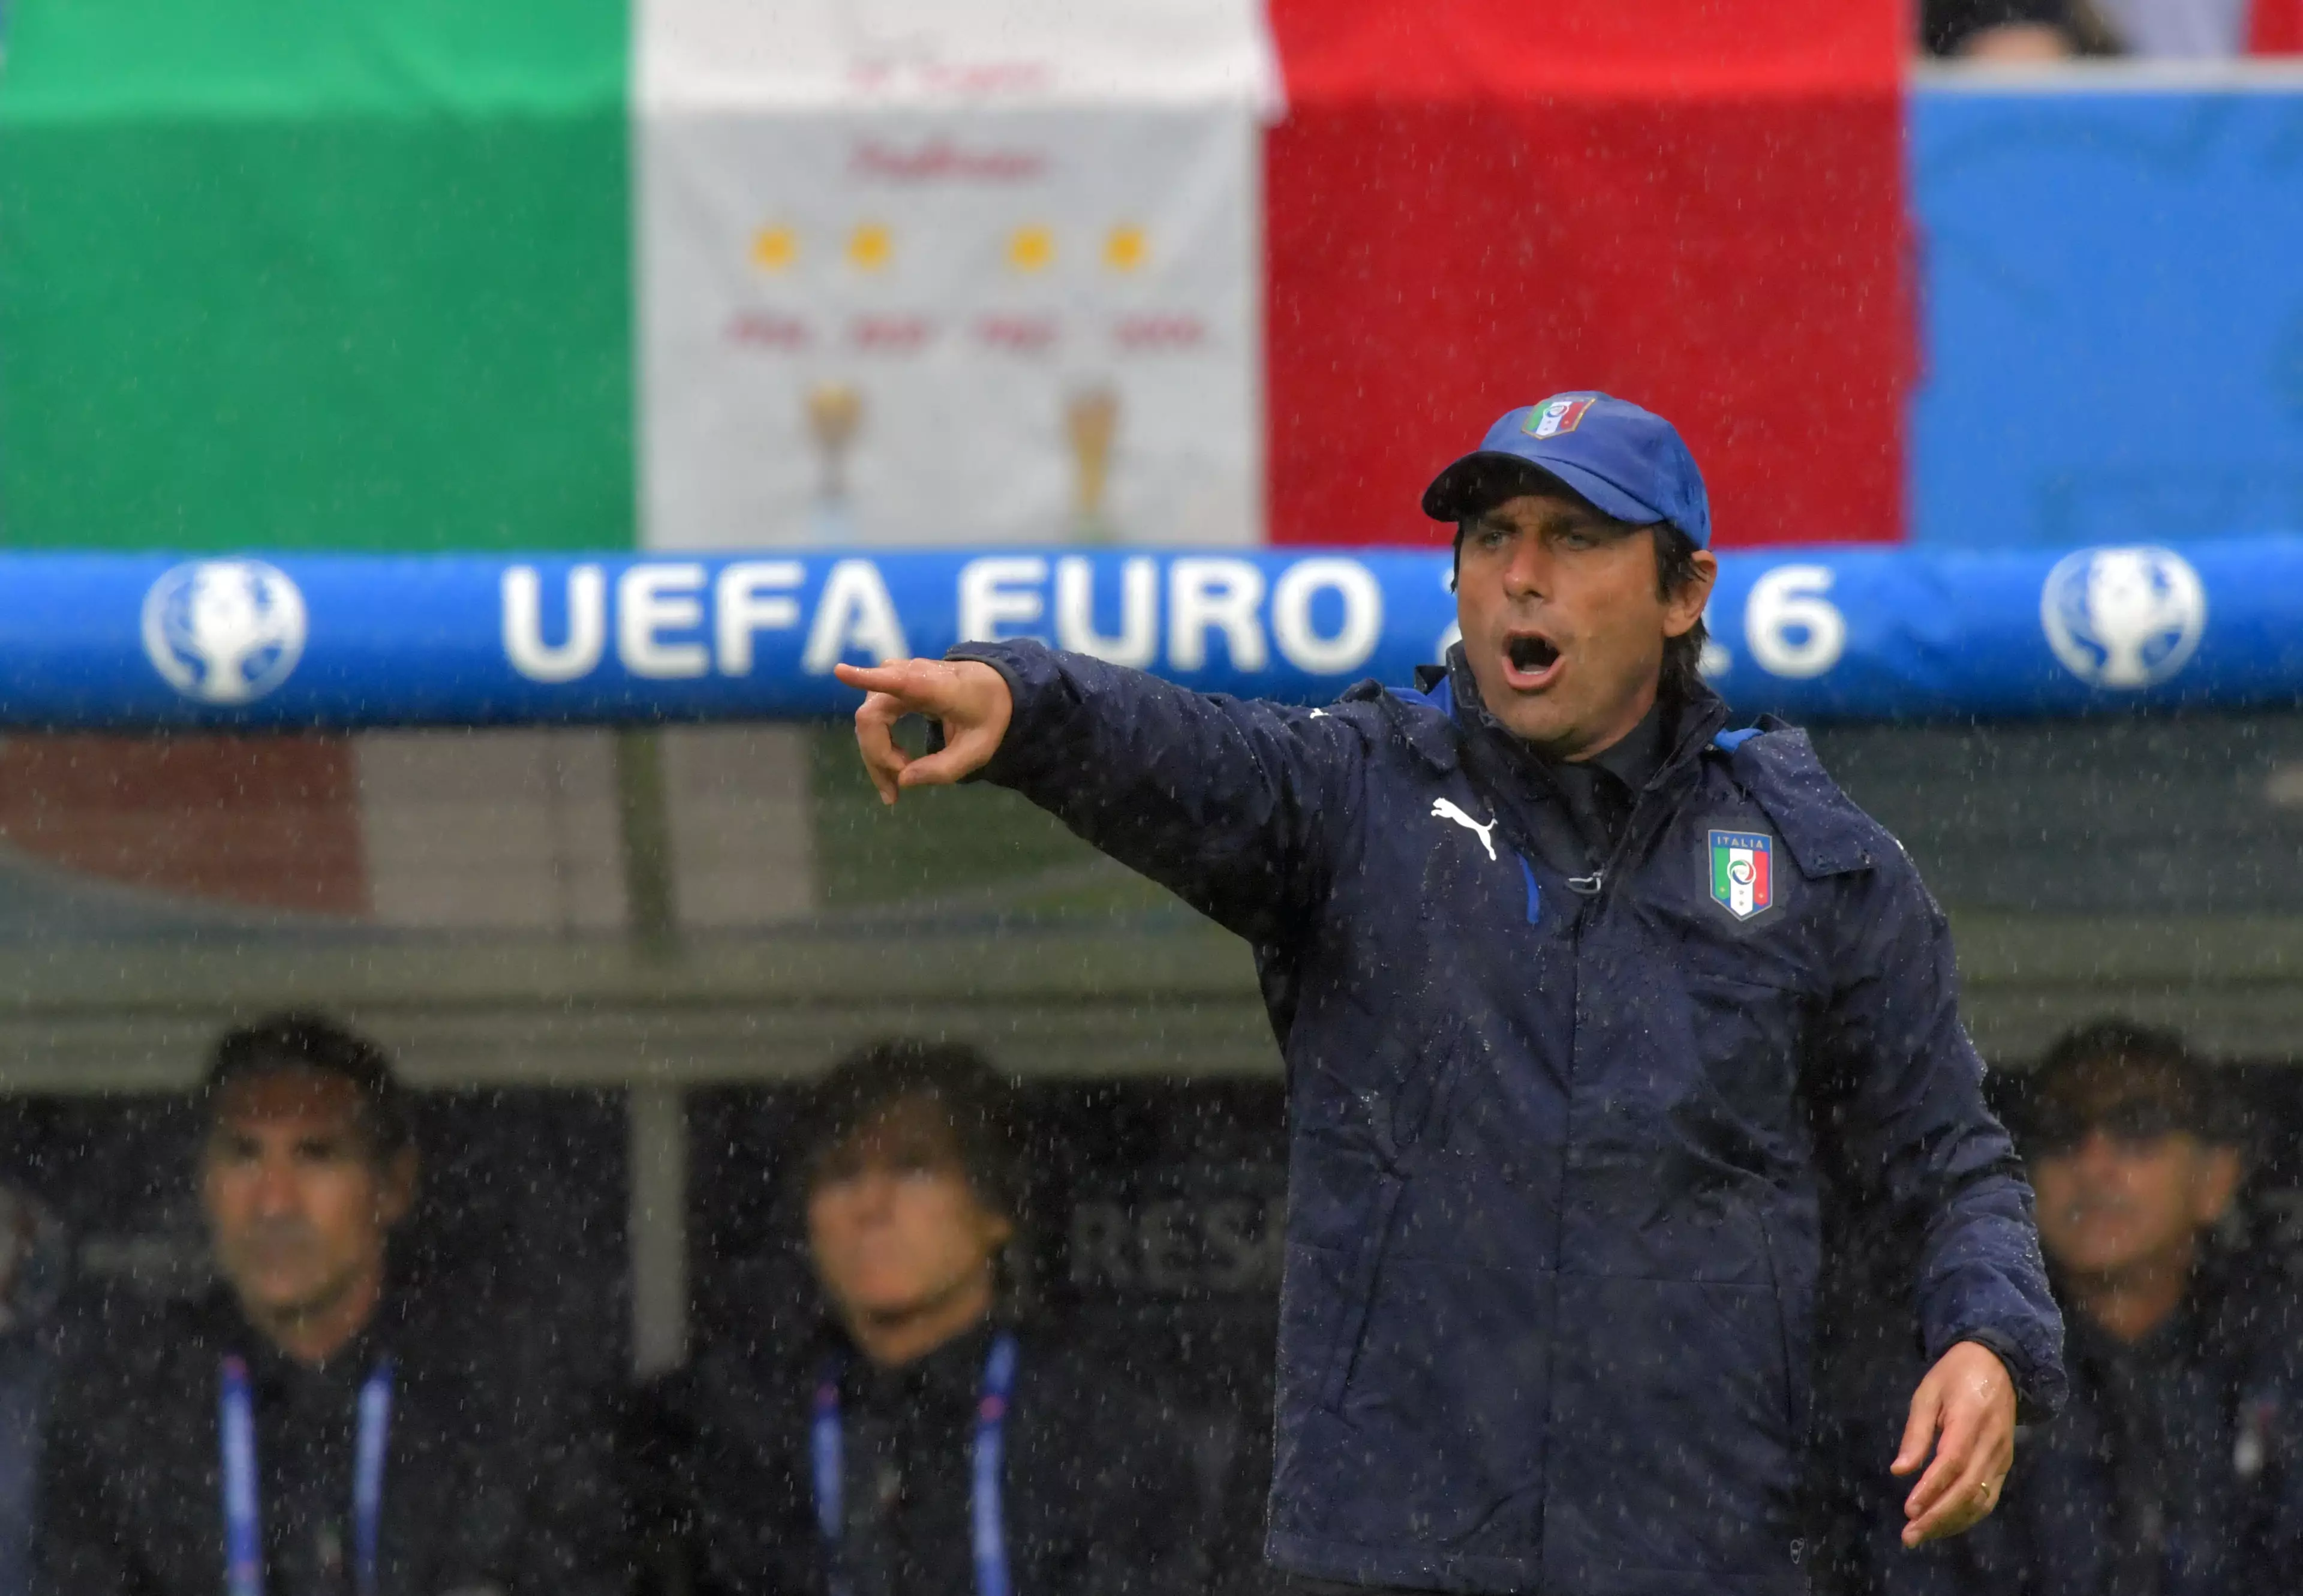 Conte had a great time of it as Italy manager at the Euros. Image: PA Images.